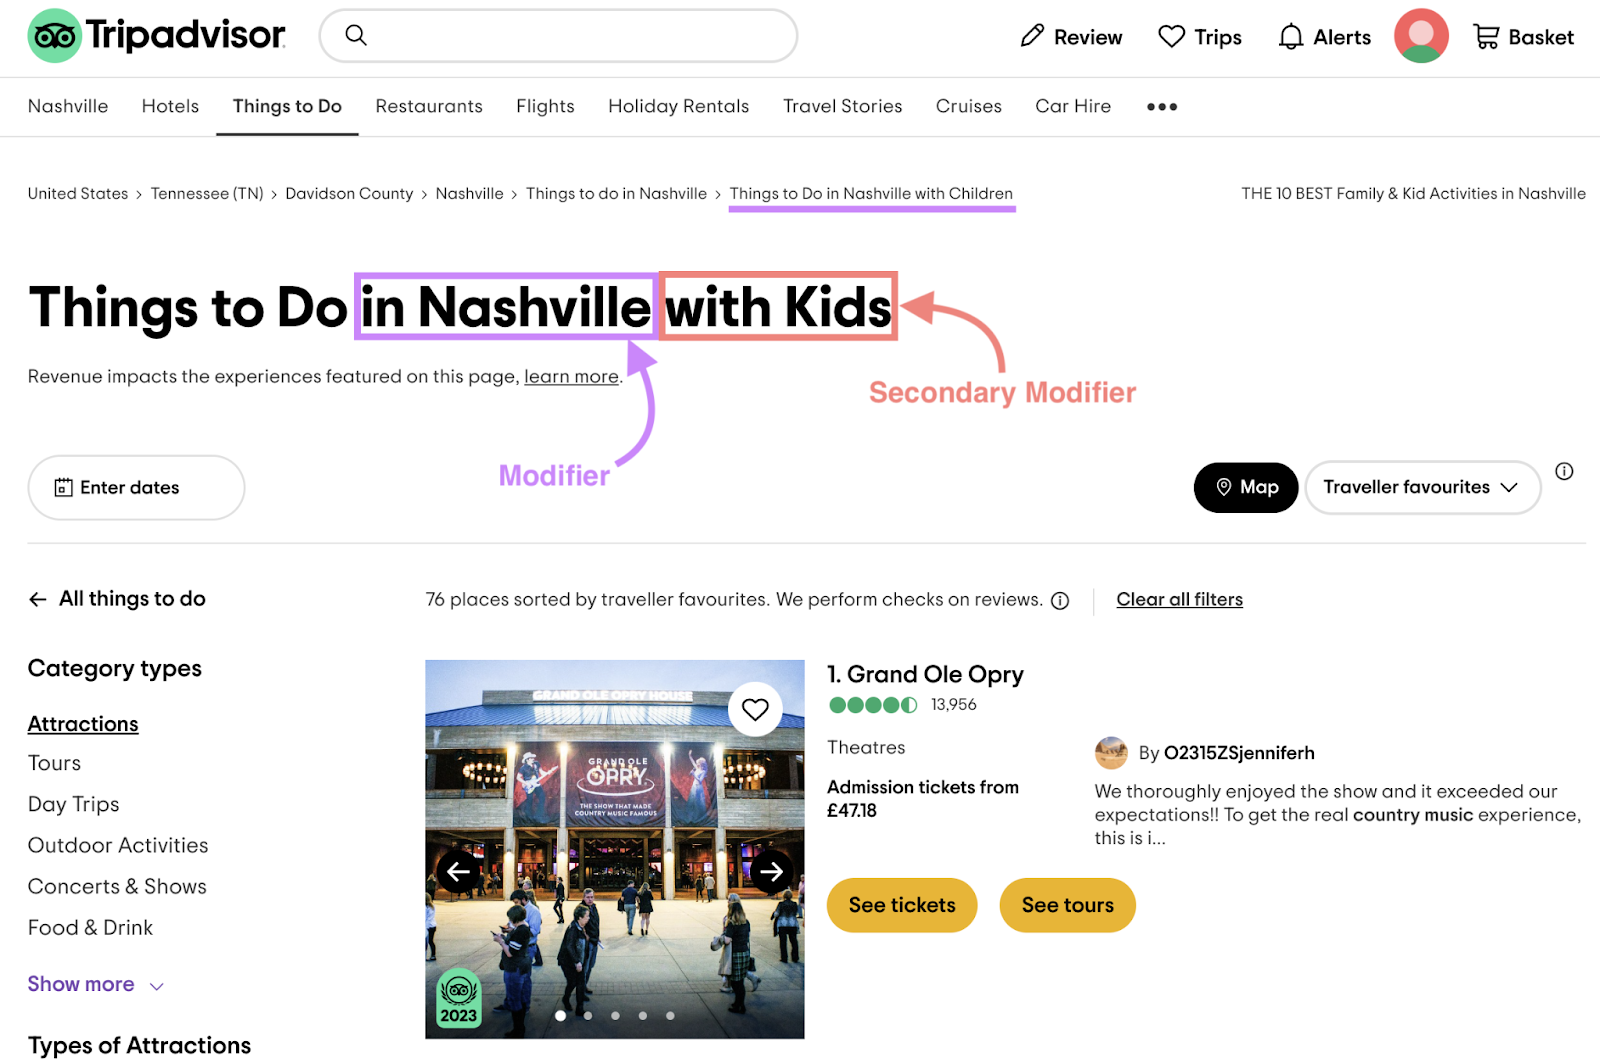 “Things to do in Nashville with kids” on Tripadvisor